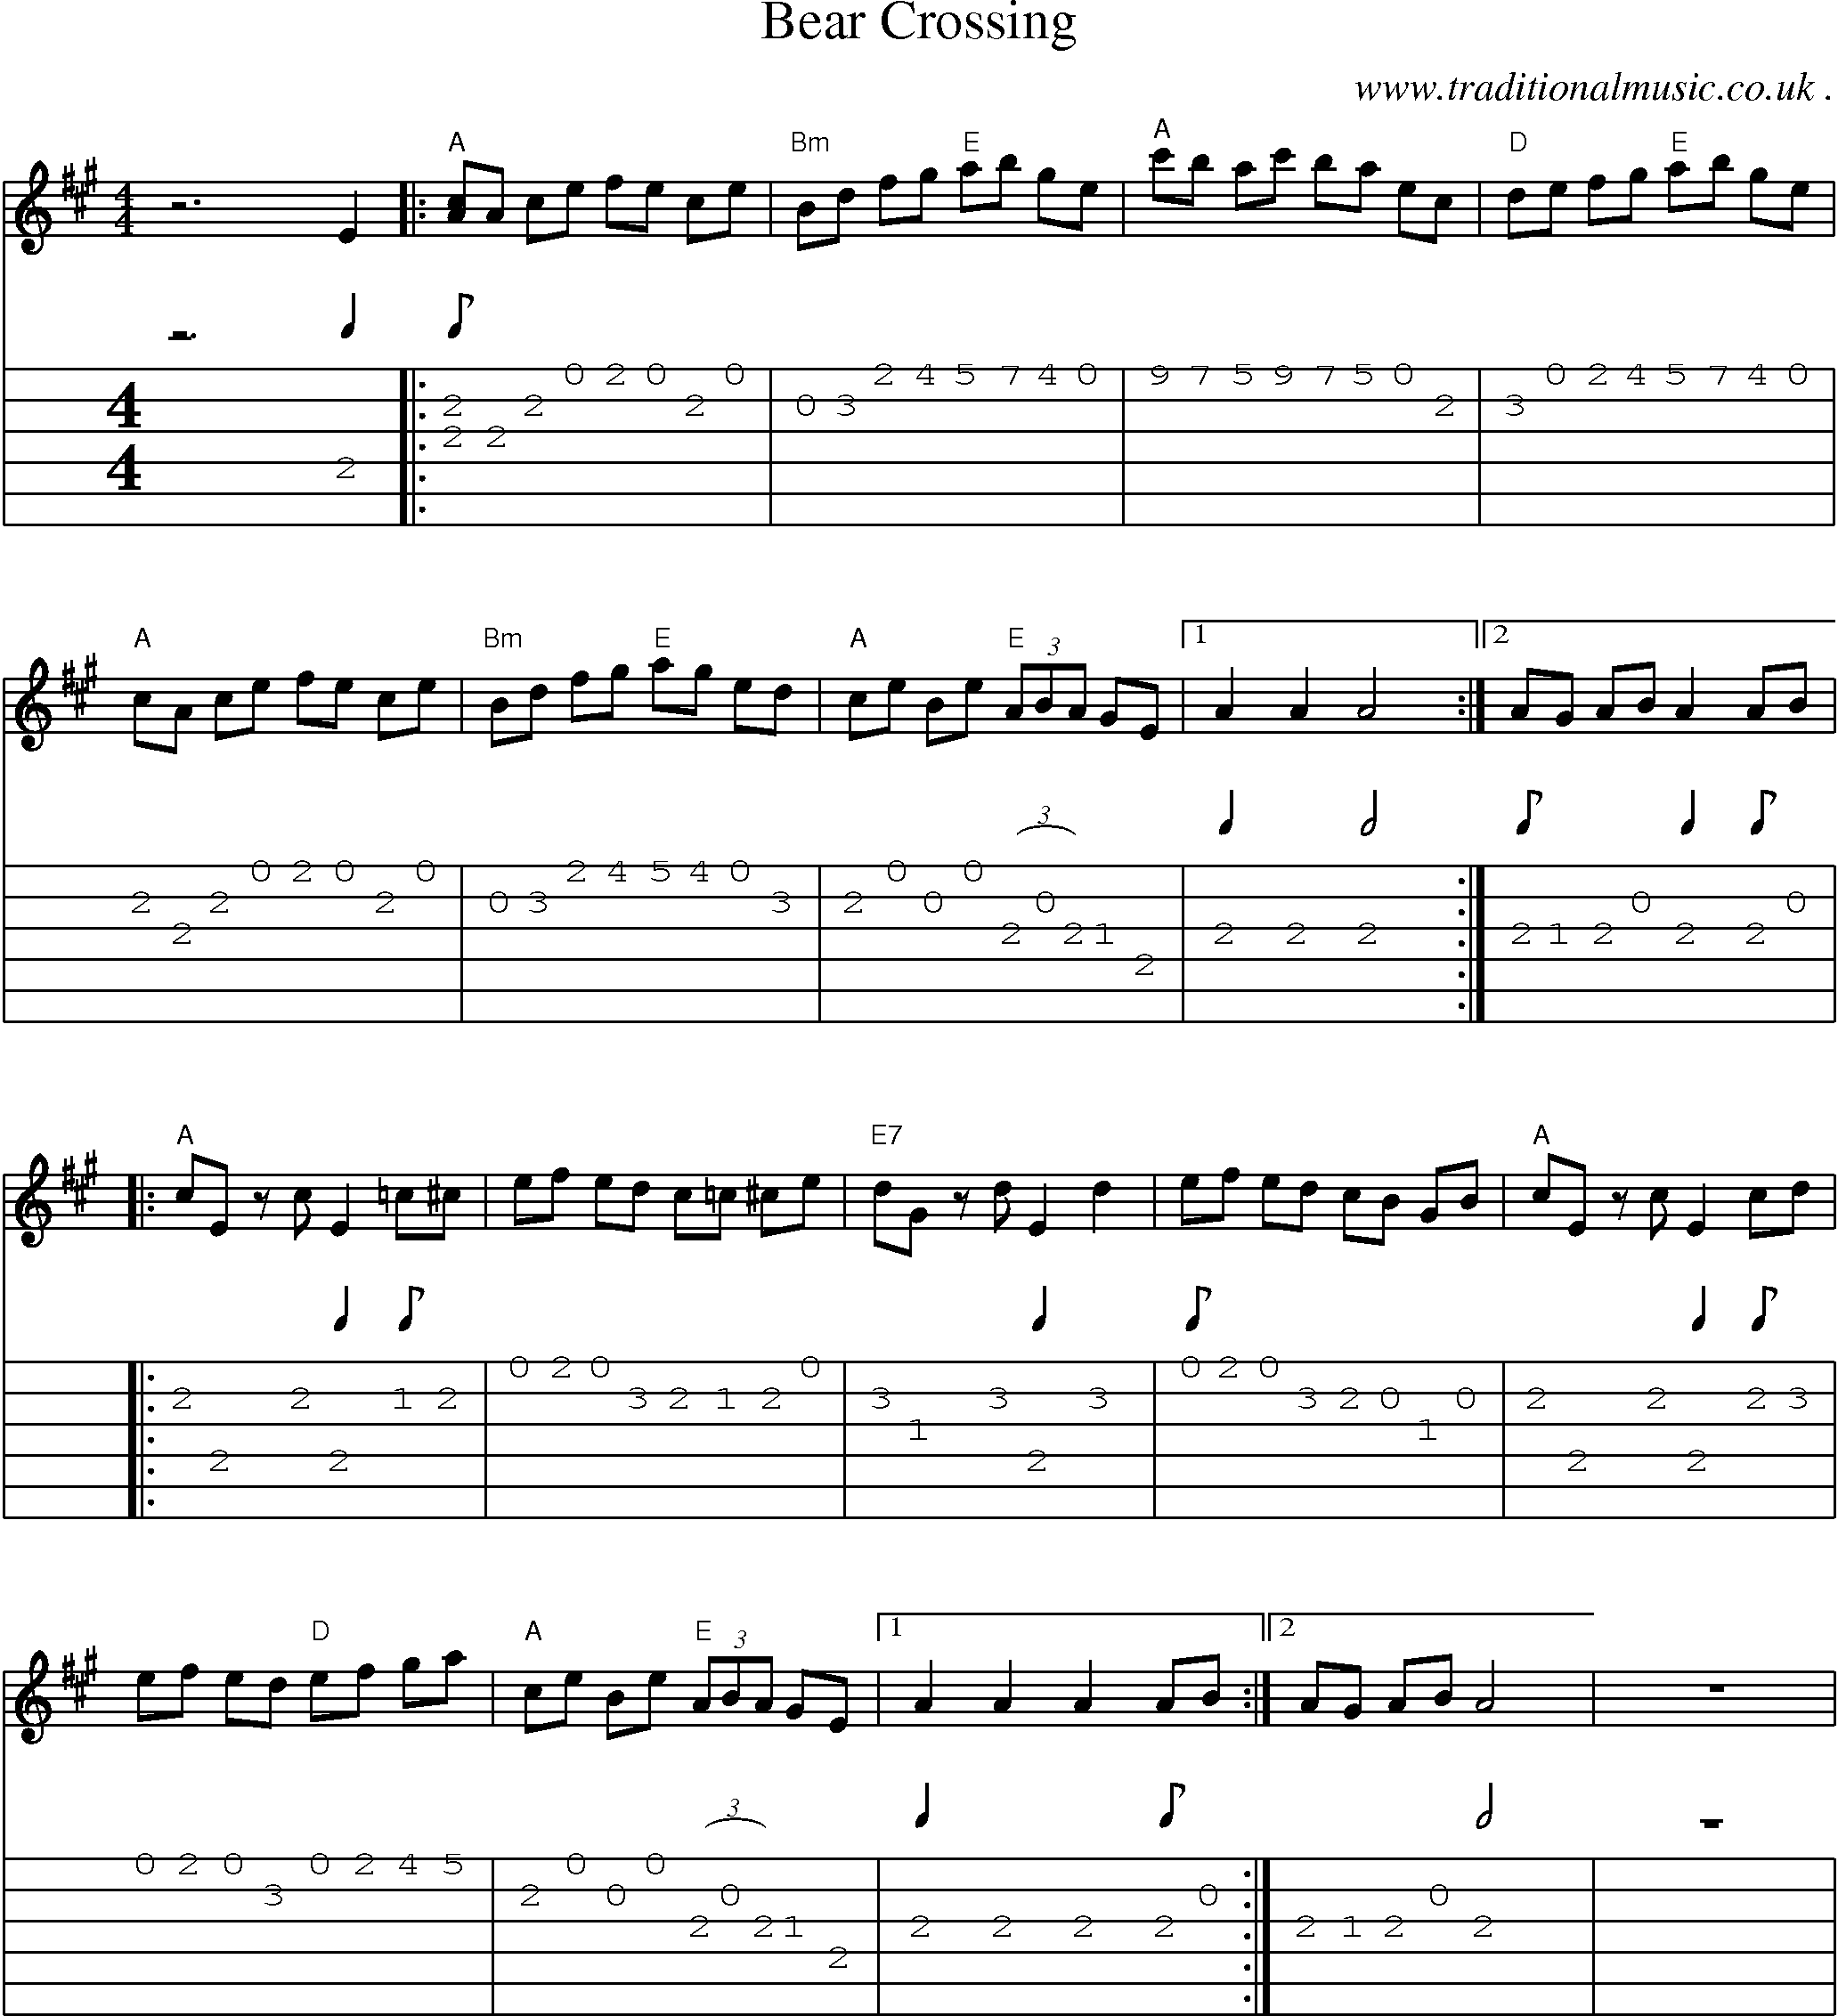 Music Score and Guitar Tabs for Bear Crossing